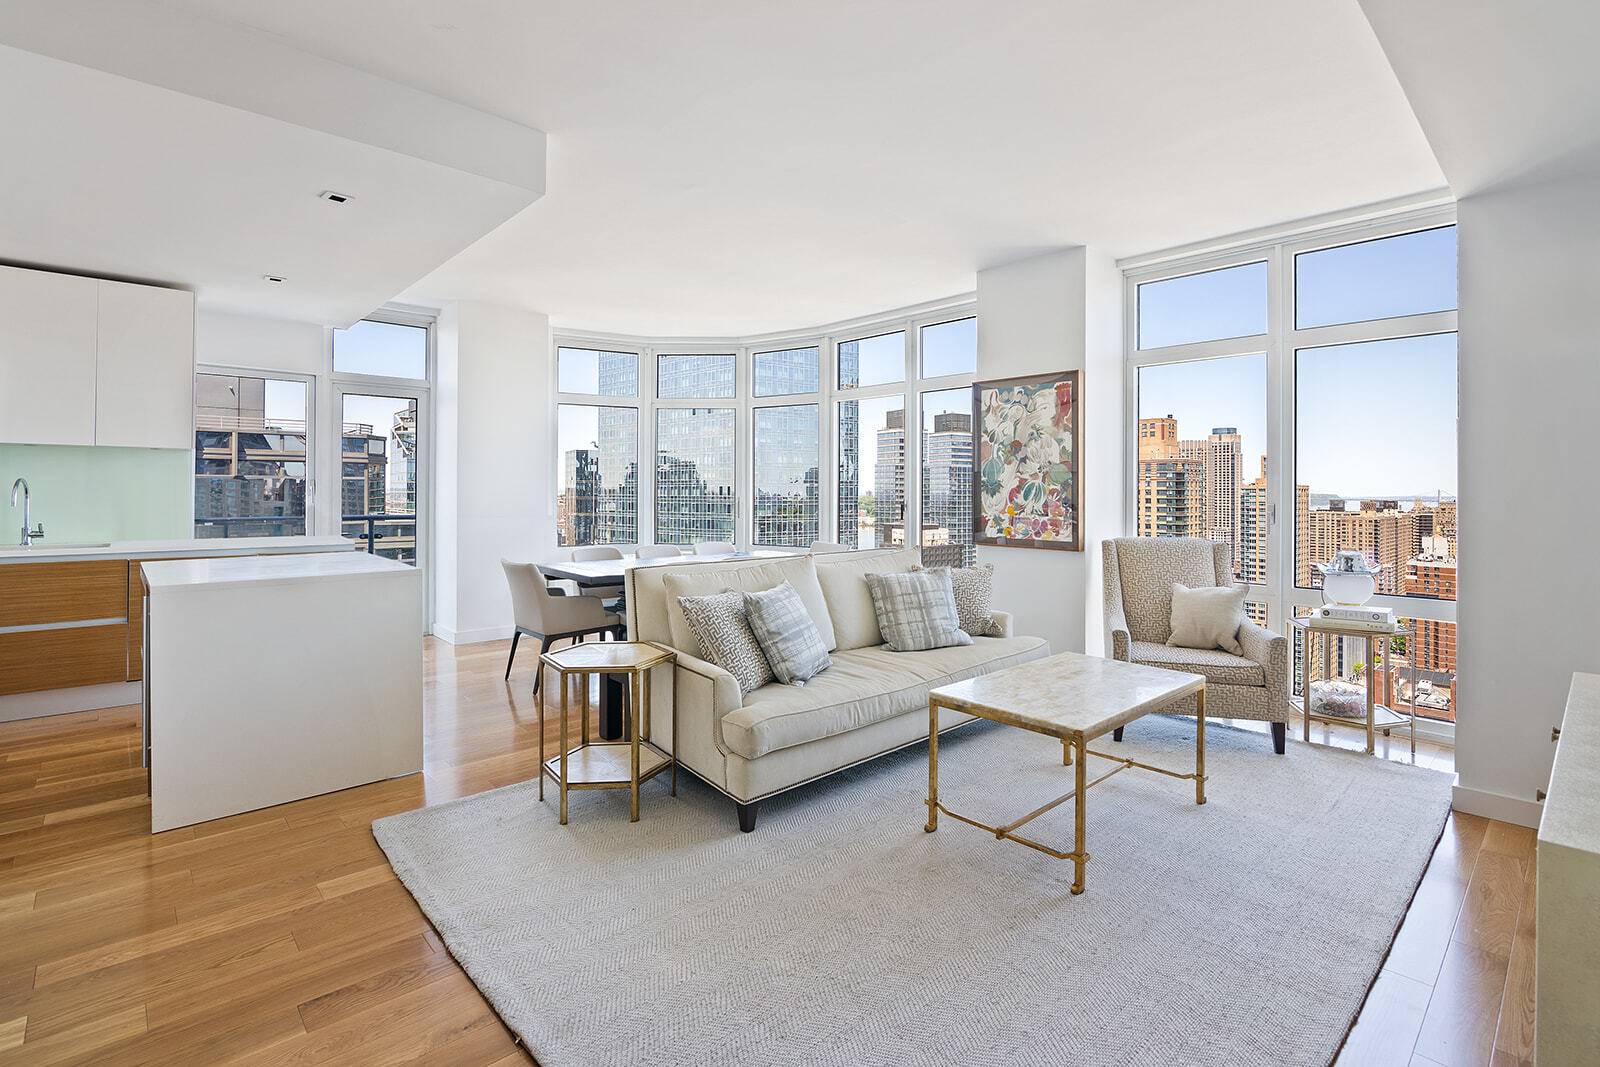 Indulge in luxury living with this rarely available A line, high floor residence offering a coveted combination of space, views, and sophistication.